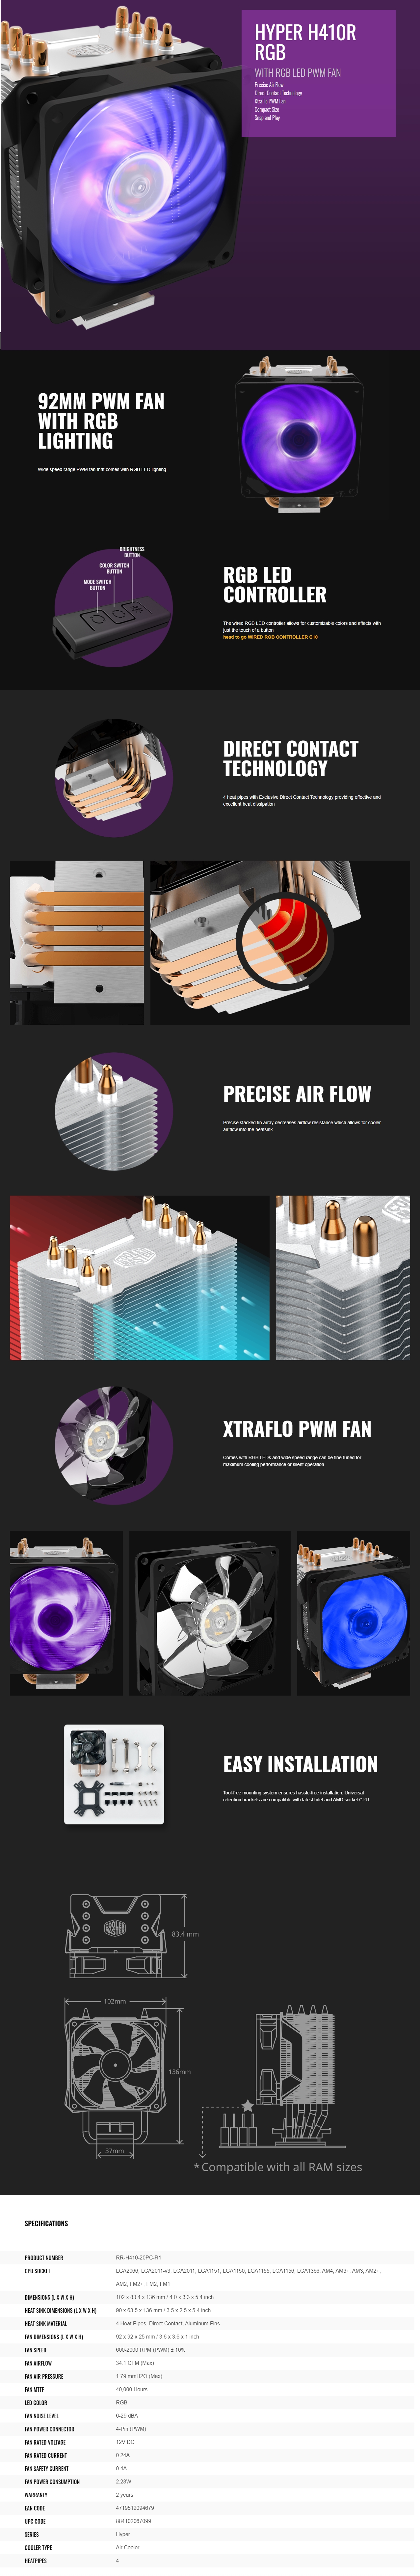 A large marketing image providing additional information about the product Cooler Master Hyper H410R RGB CPU Cooler - Additional alt info not provided